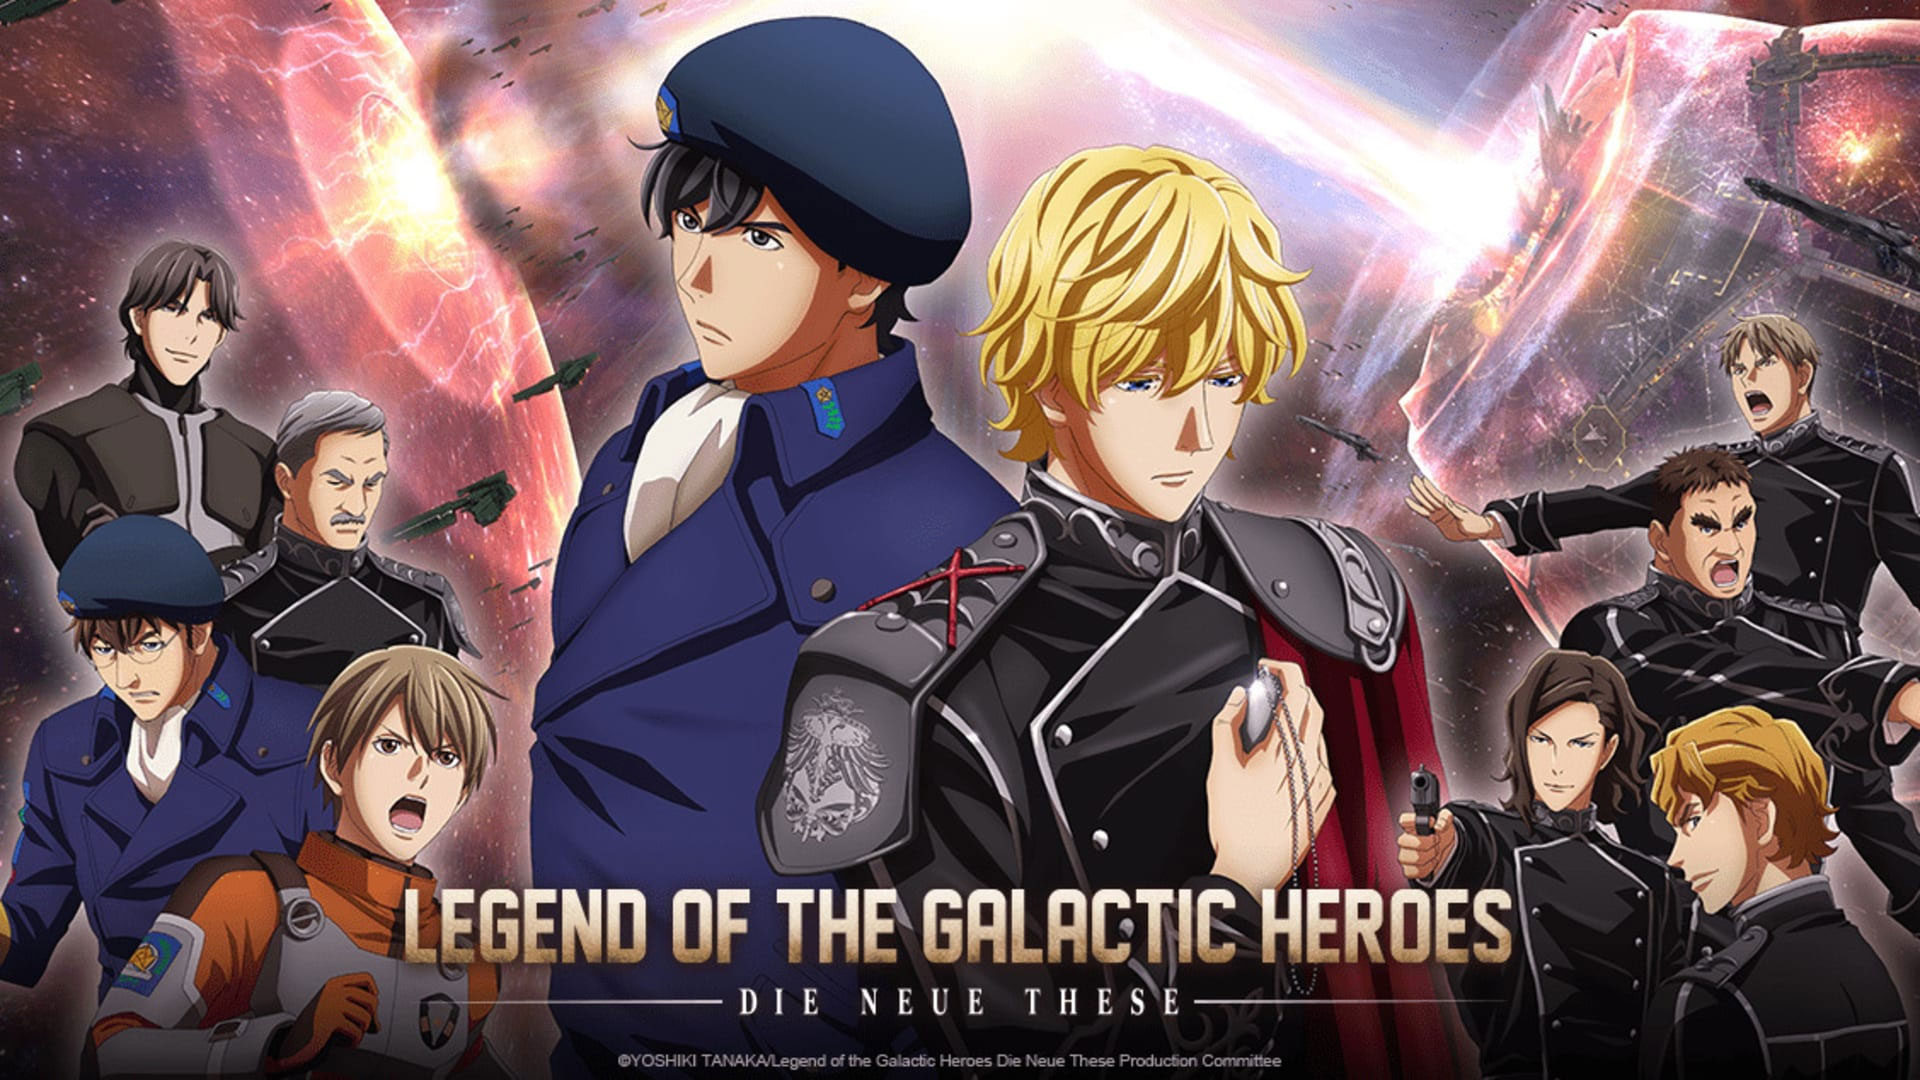 Legend of the Galactic Heroes: Die Neue These is Getting a Sequel